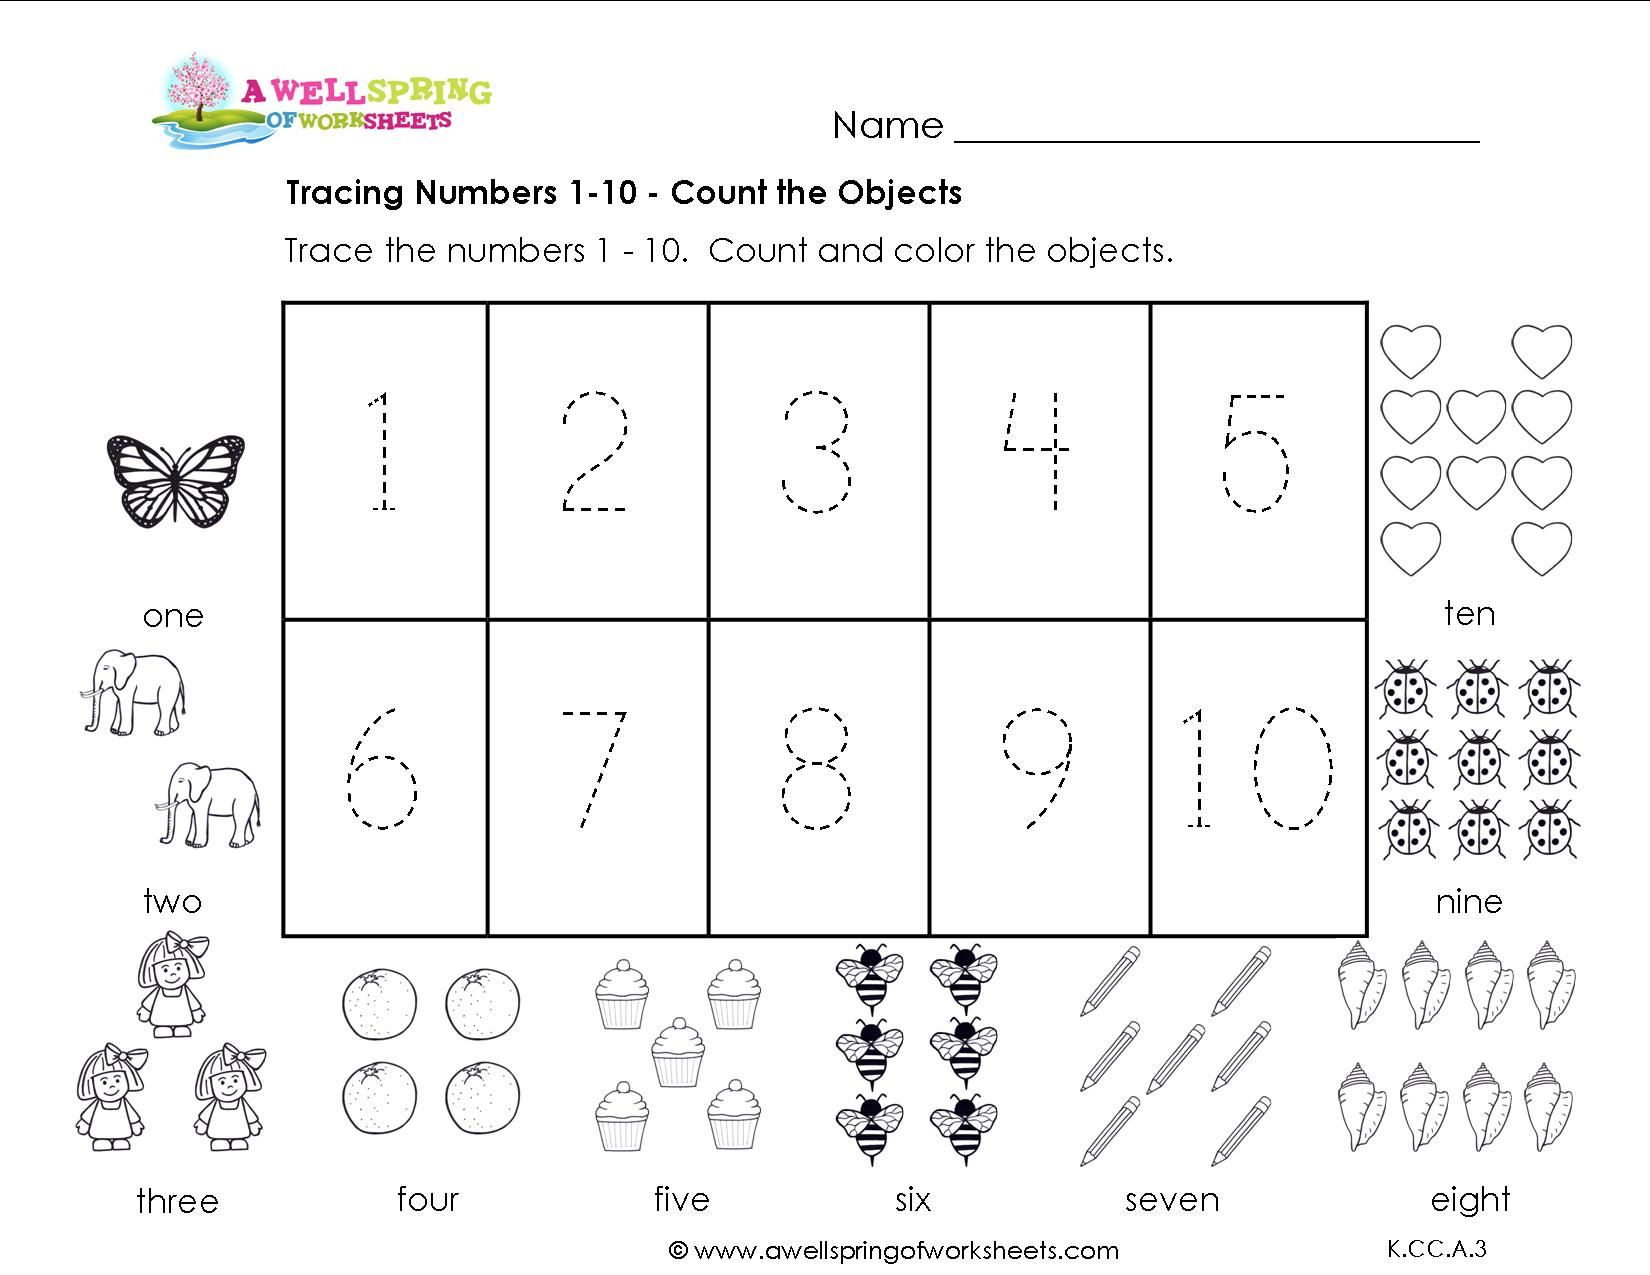 Grade Level Worksheets | Kindergarten Math Worksheets intended for Tracing Letters Numbers And Shapes